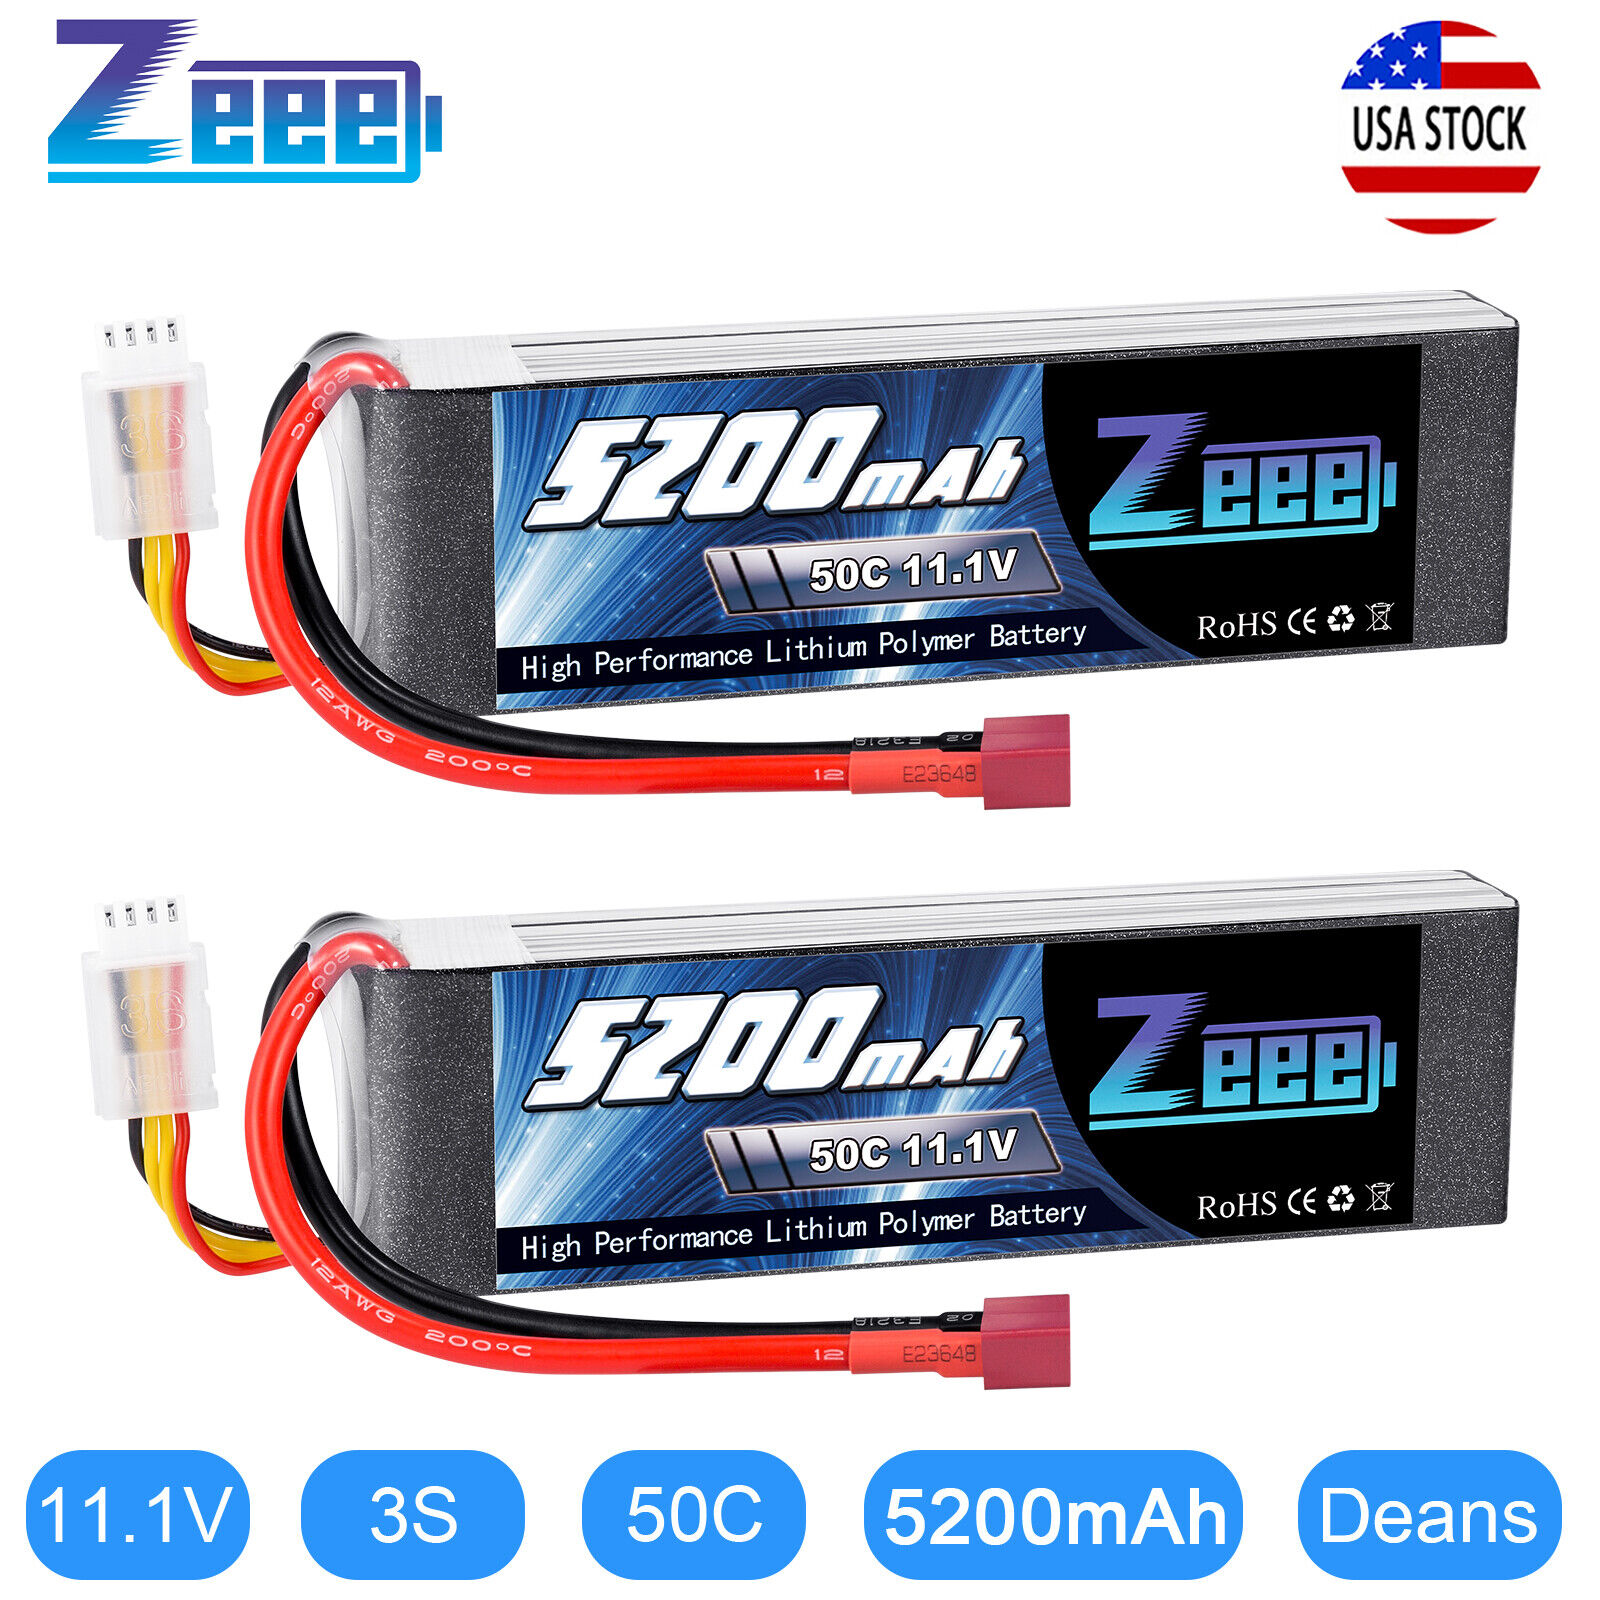 2PCS Zeee 11.1V 5200mAh 50C 3S LiPo Battery Deans for RC Car Helicopter Airplane ZEEE Does Not Apply